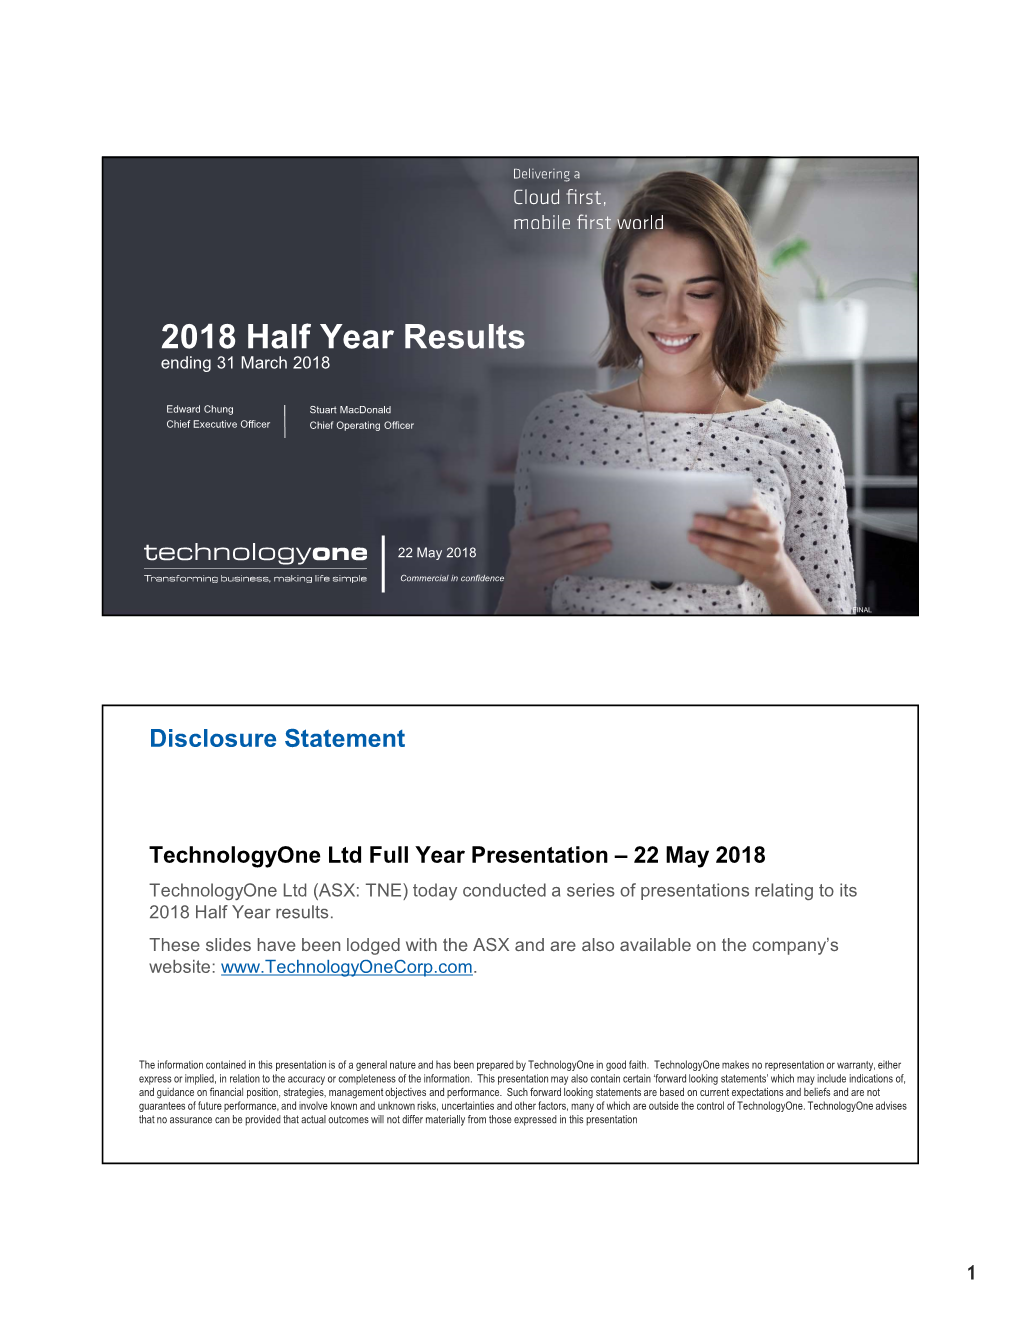 2018 Half Year Results Ending 31 March 2018